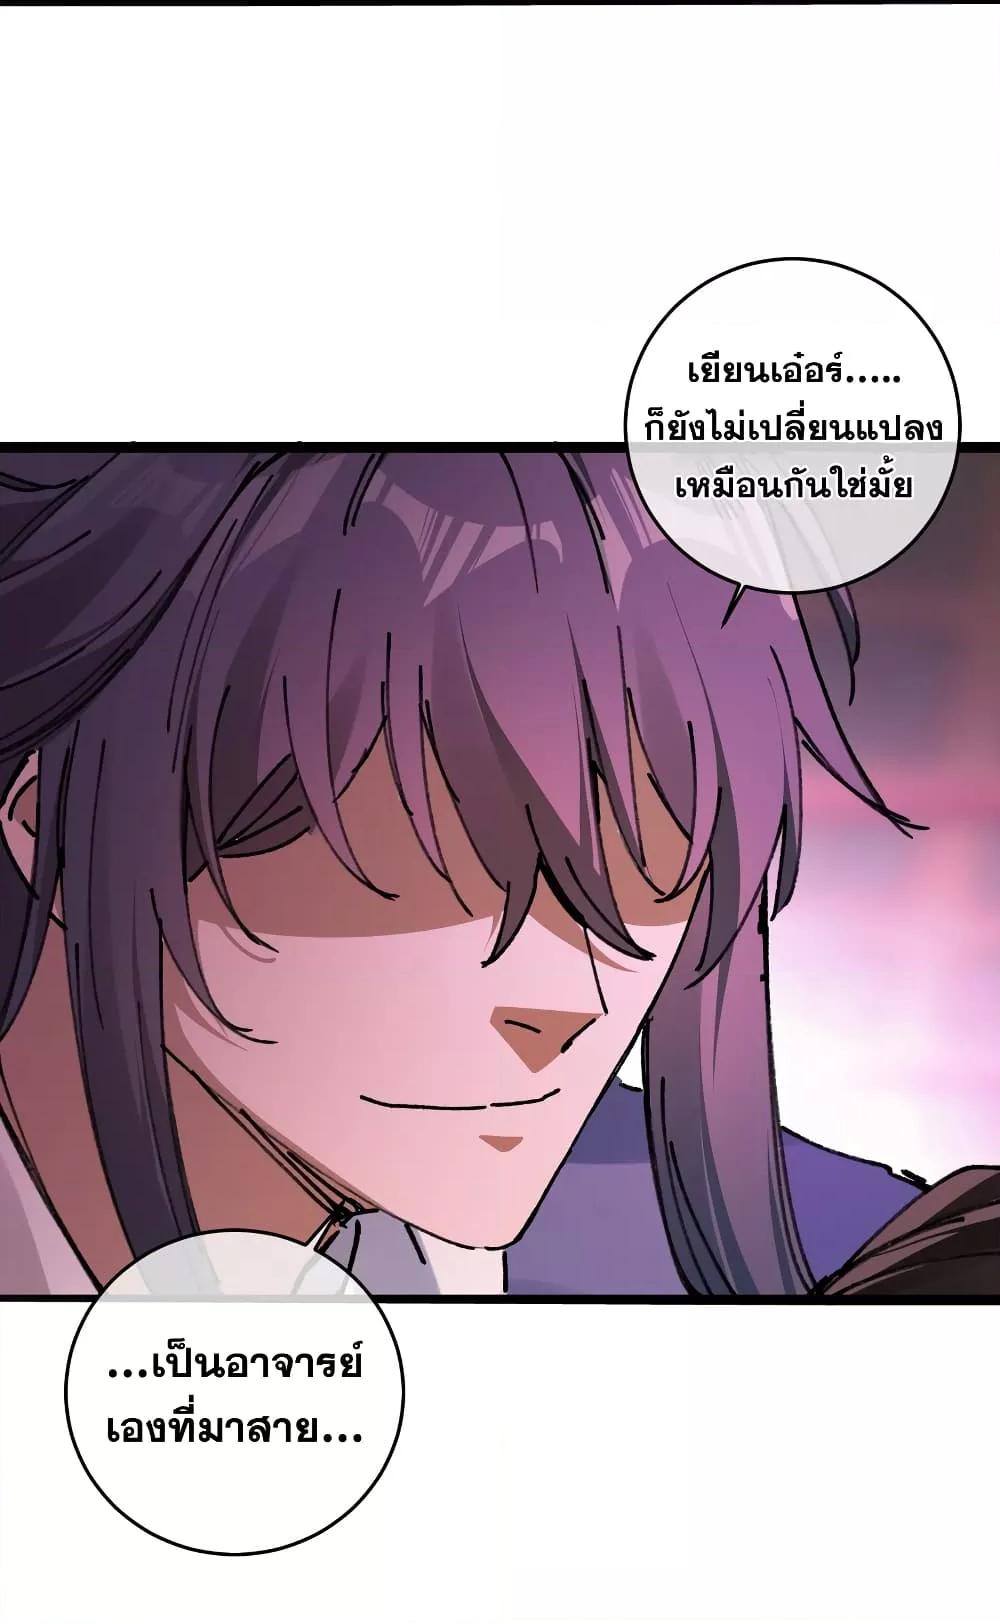 After opening his eyes, my disciple became ตอนที่ 3 (28)